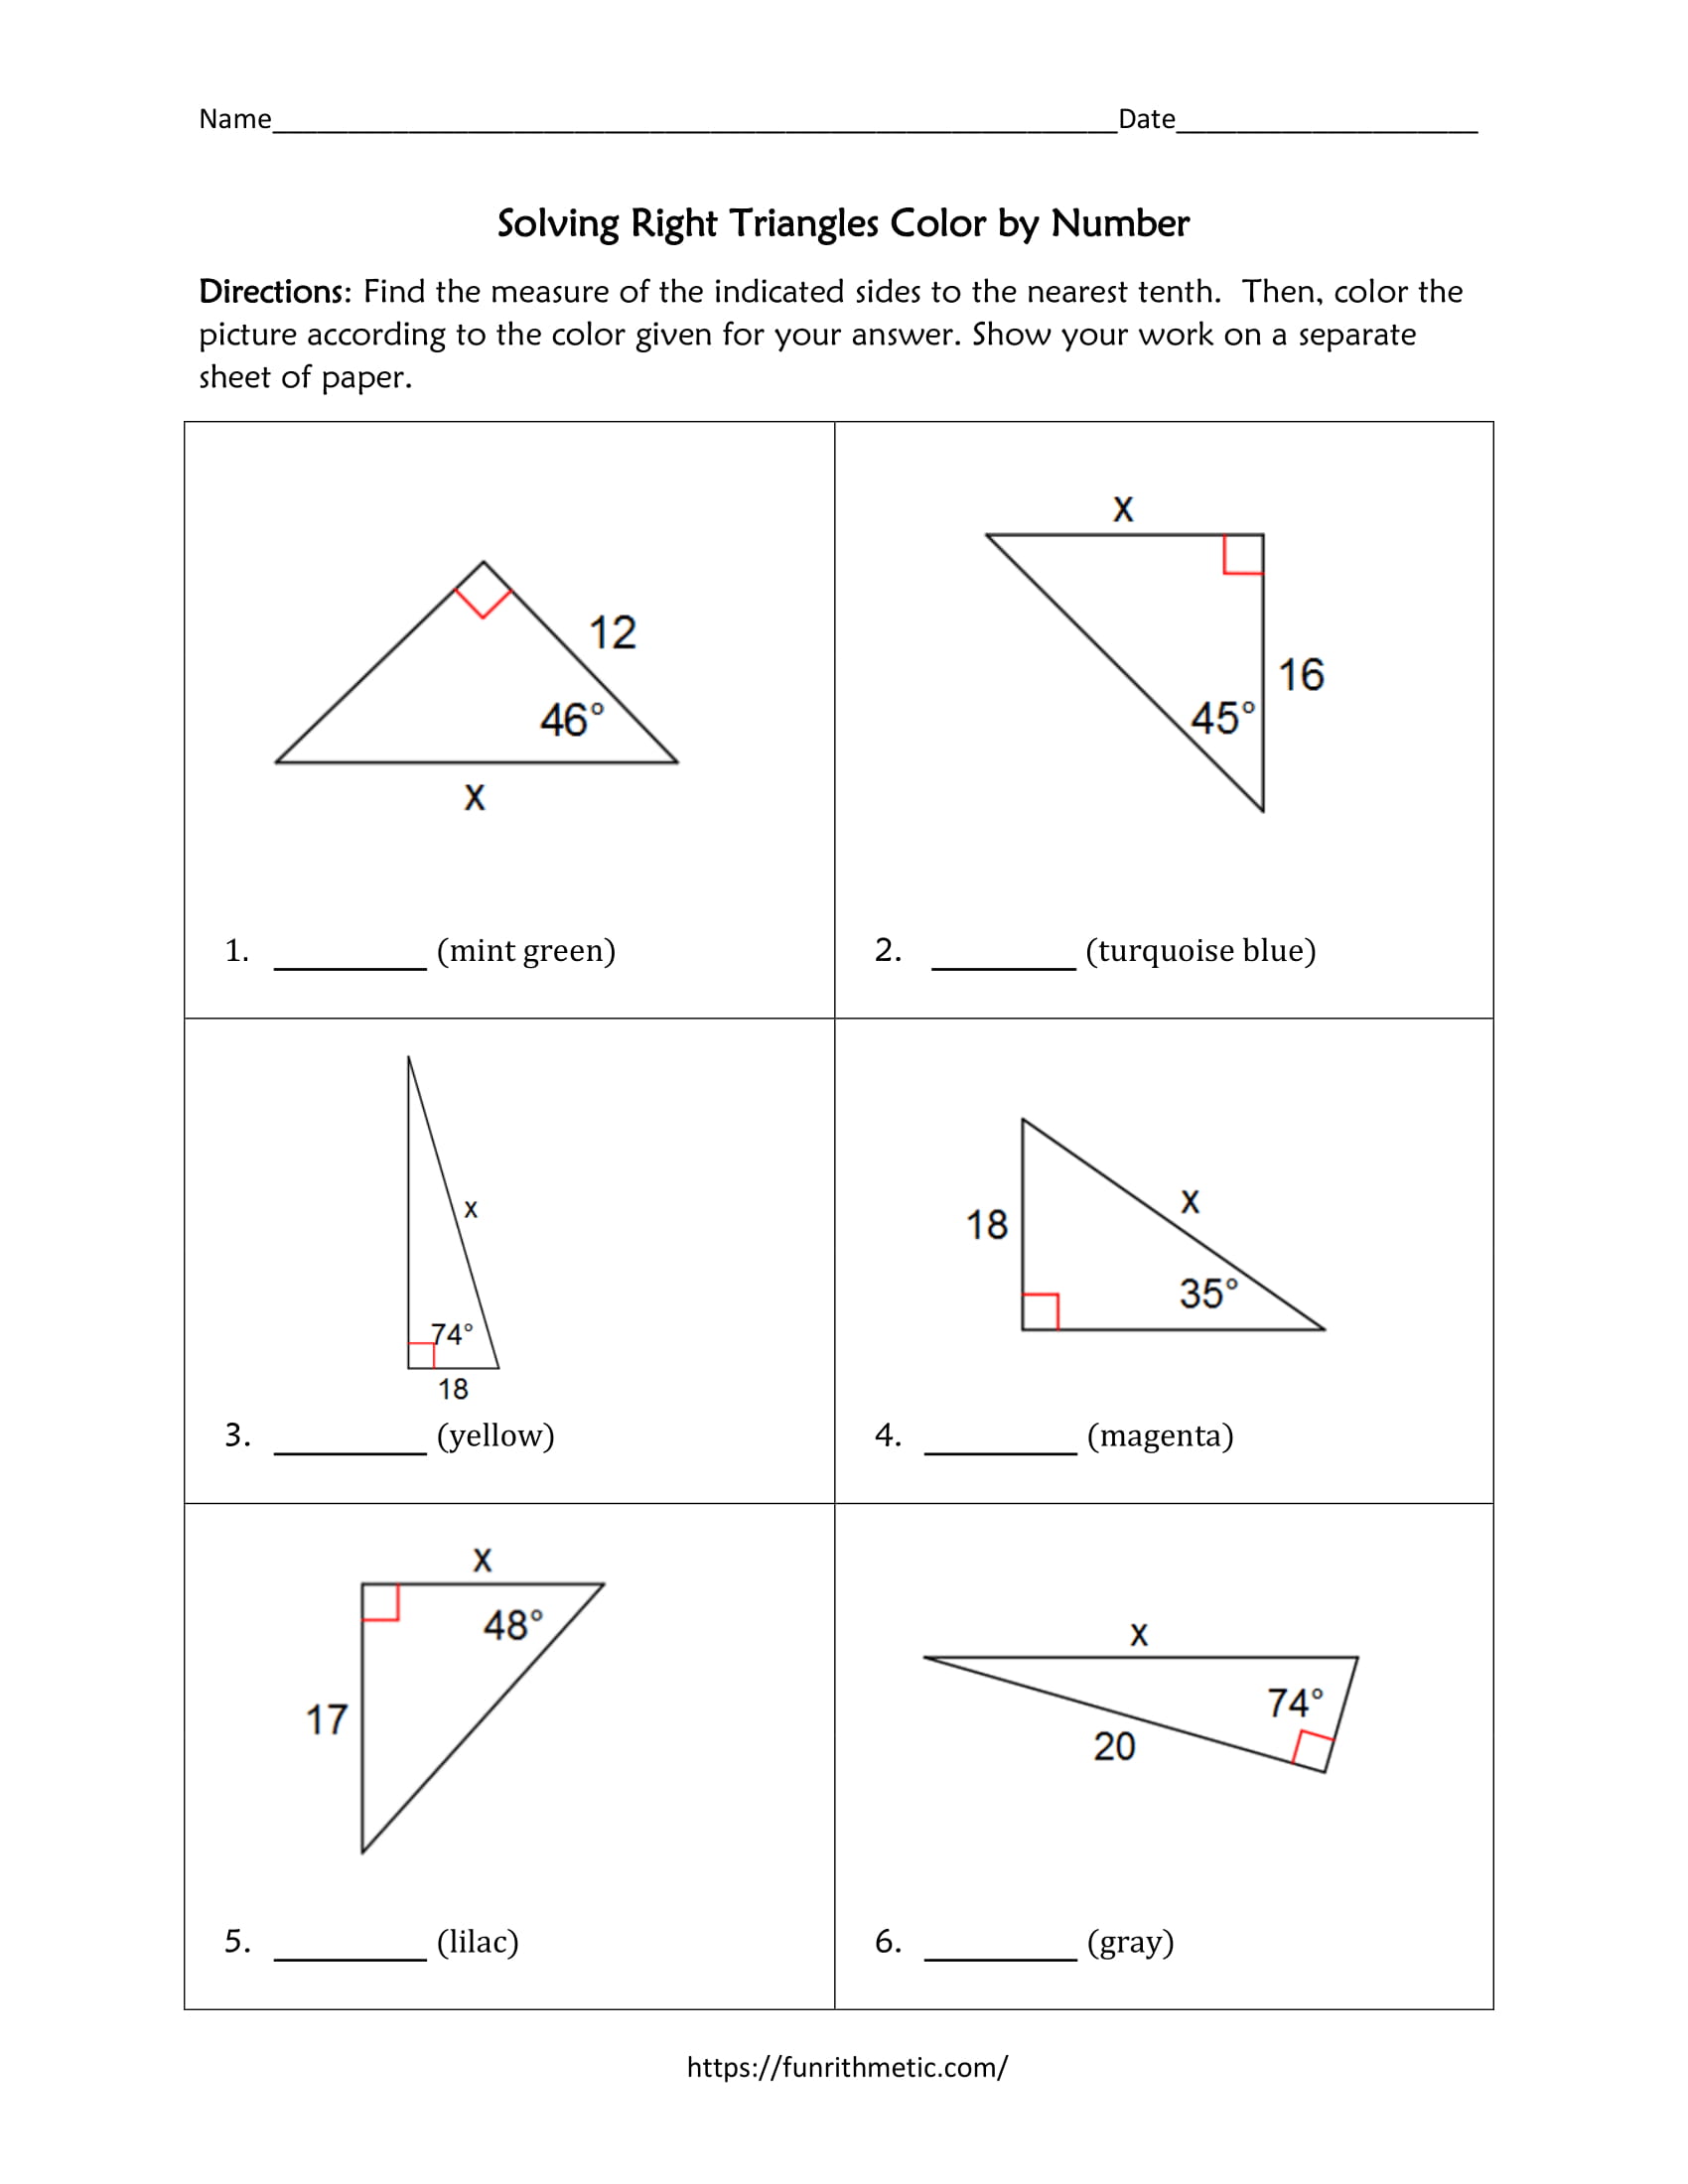 Solving Right Triangles Color by Number Within Similar Right Triangles Worksheet